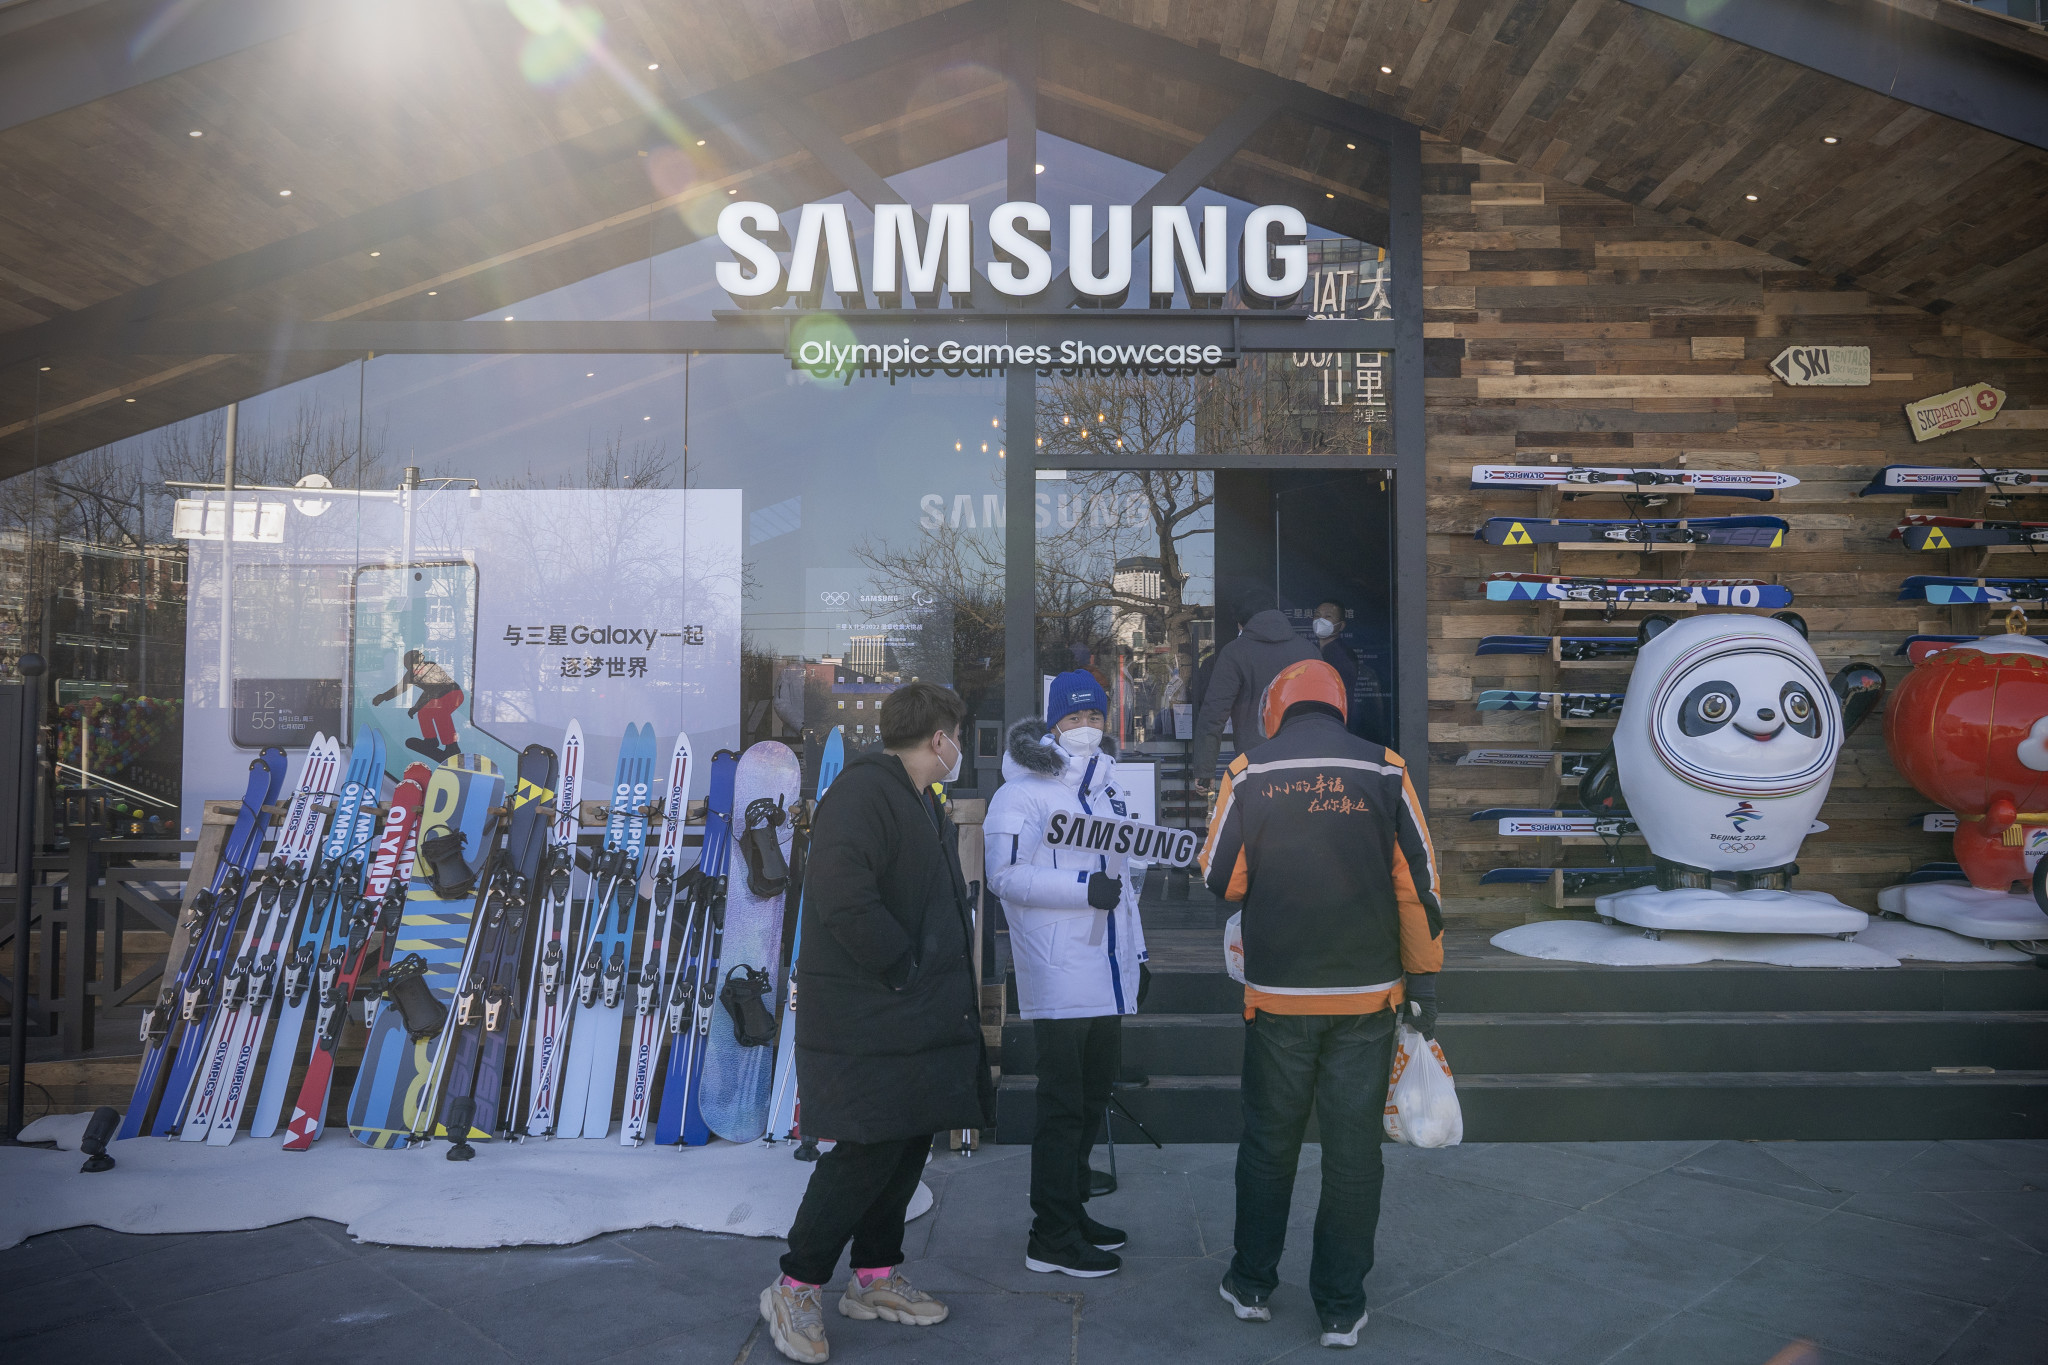 Samsung has been providing phones for athletes since Sochi 2014 ©Getty Images